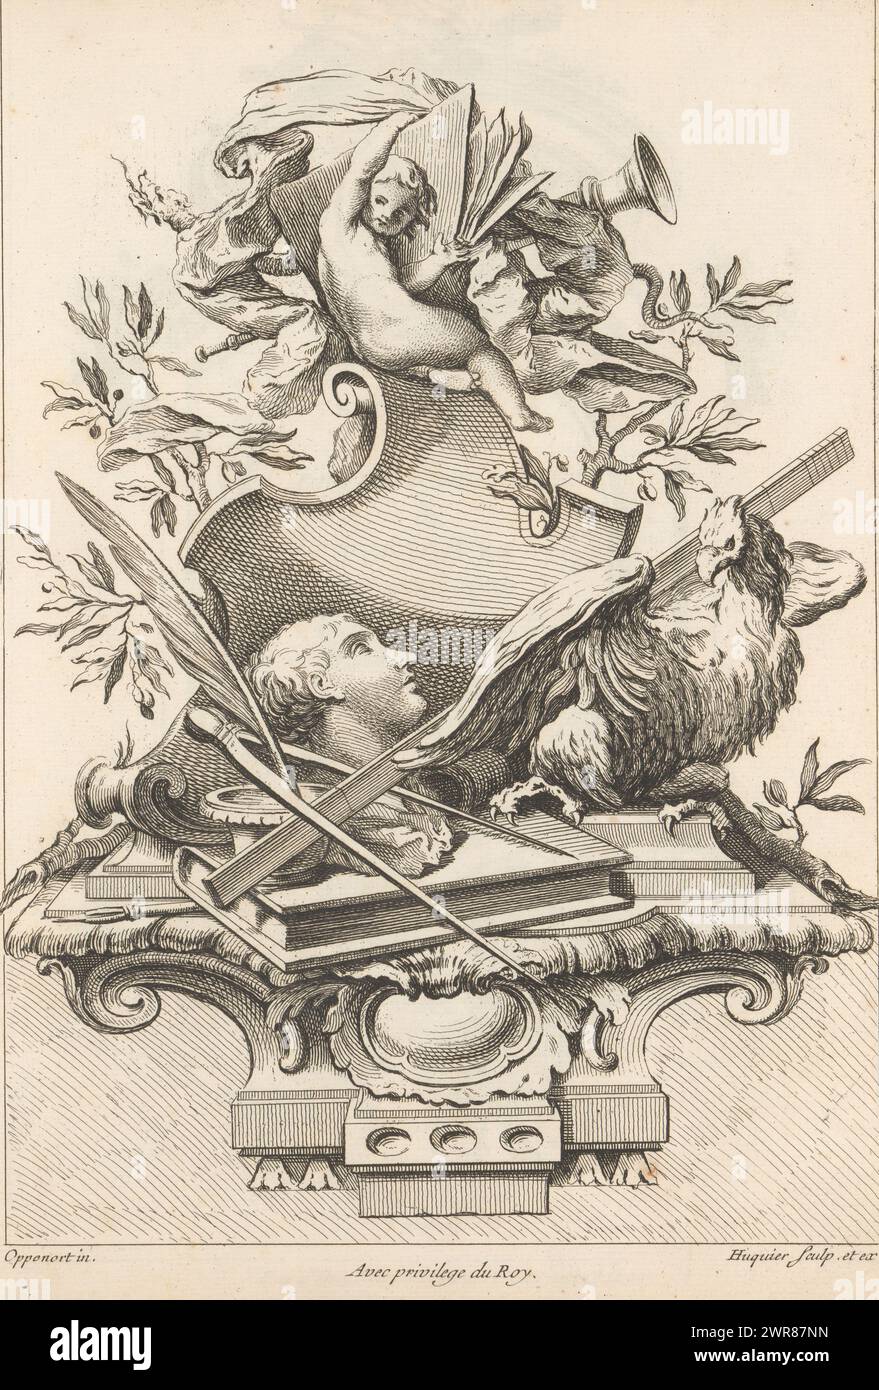 Ornament with an eagle and objects representing the arts, Various designs for practitioners of fine arts (series title), Premier livre de différents morceaux a l'usage de tous ceux qui s'appliquent aux beaux arts (series title), Below others a bust, compass and ruler, quill and ink, and a wind instrument. This print is part of an album., print maker: Gabriel Huquier, after design by: Gilles Marie Oppenort, publisher: Gabriel Huquier, Paris, c. 1725 - c. 1750, paper, etching, height 324 mm × width 242 mm, print Stock Photo